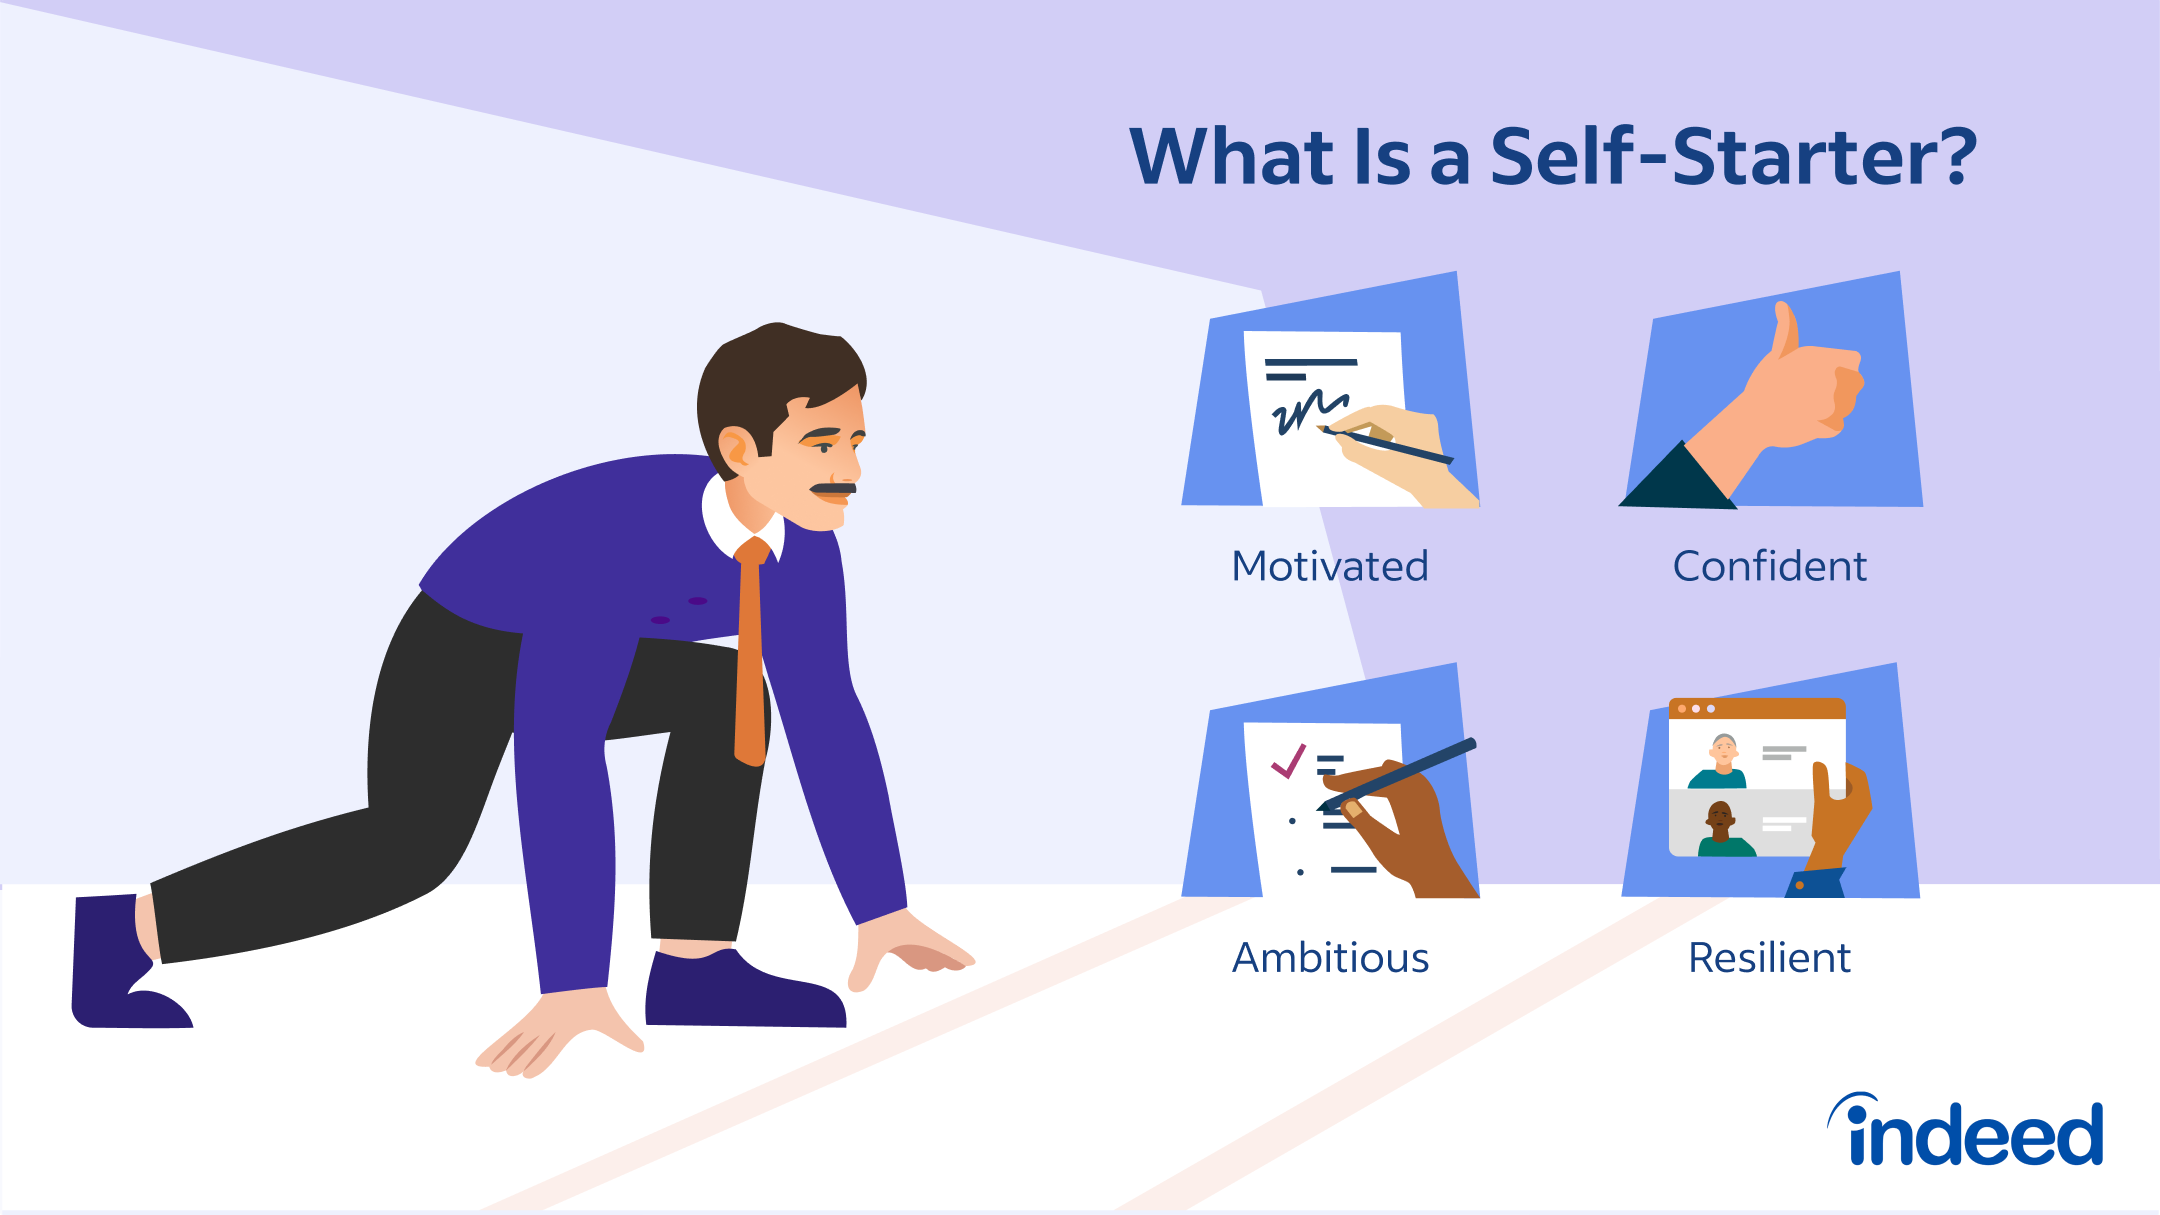 What Does It Mean To Be a Self-Starter?